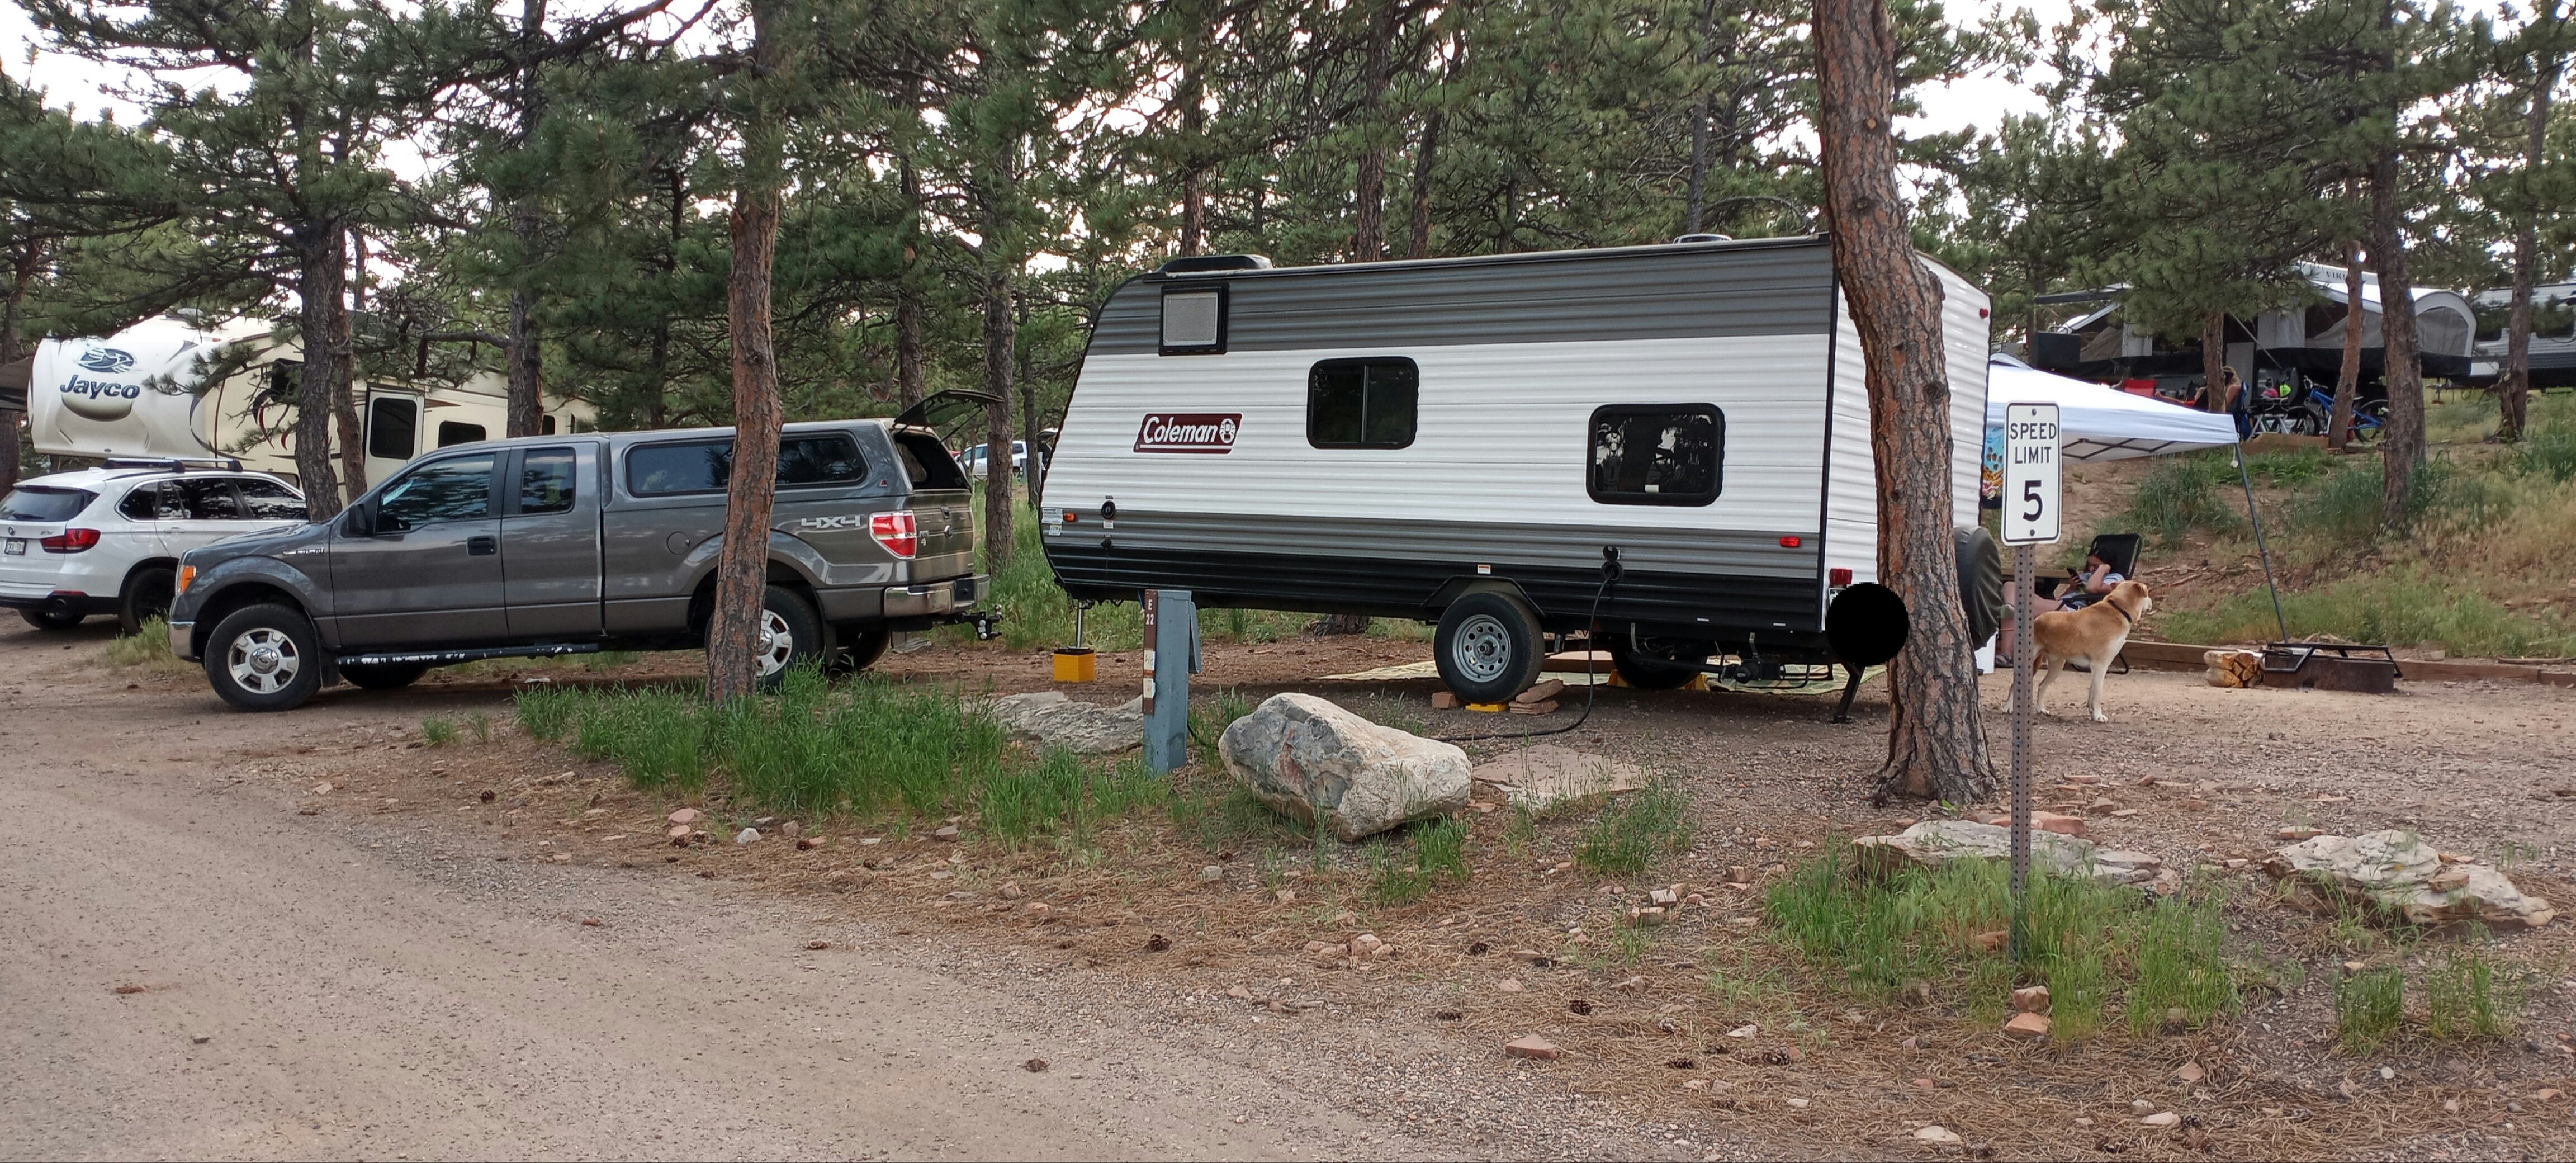 Camper submitted image from Eagle Campground at Carter Lake - 5